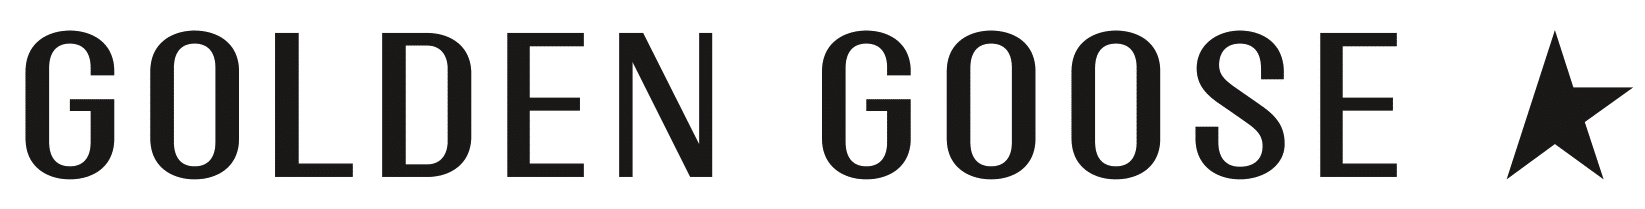 logo-gg-new-1-1669935180.png